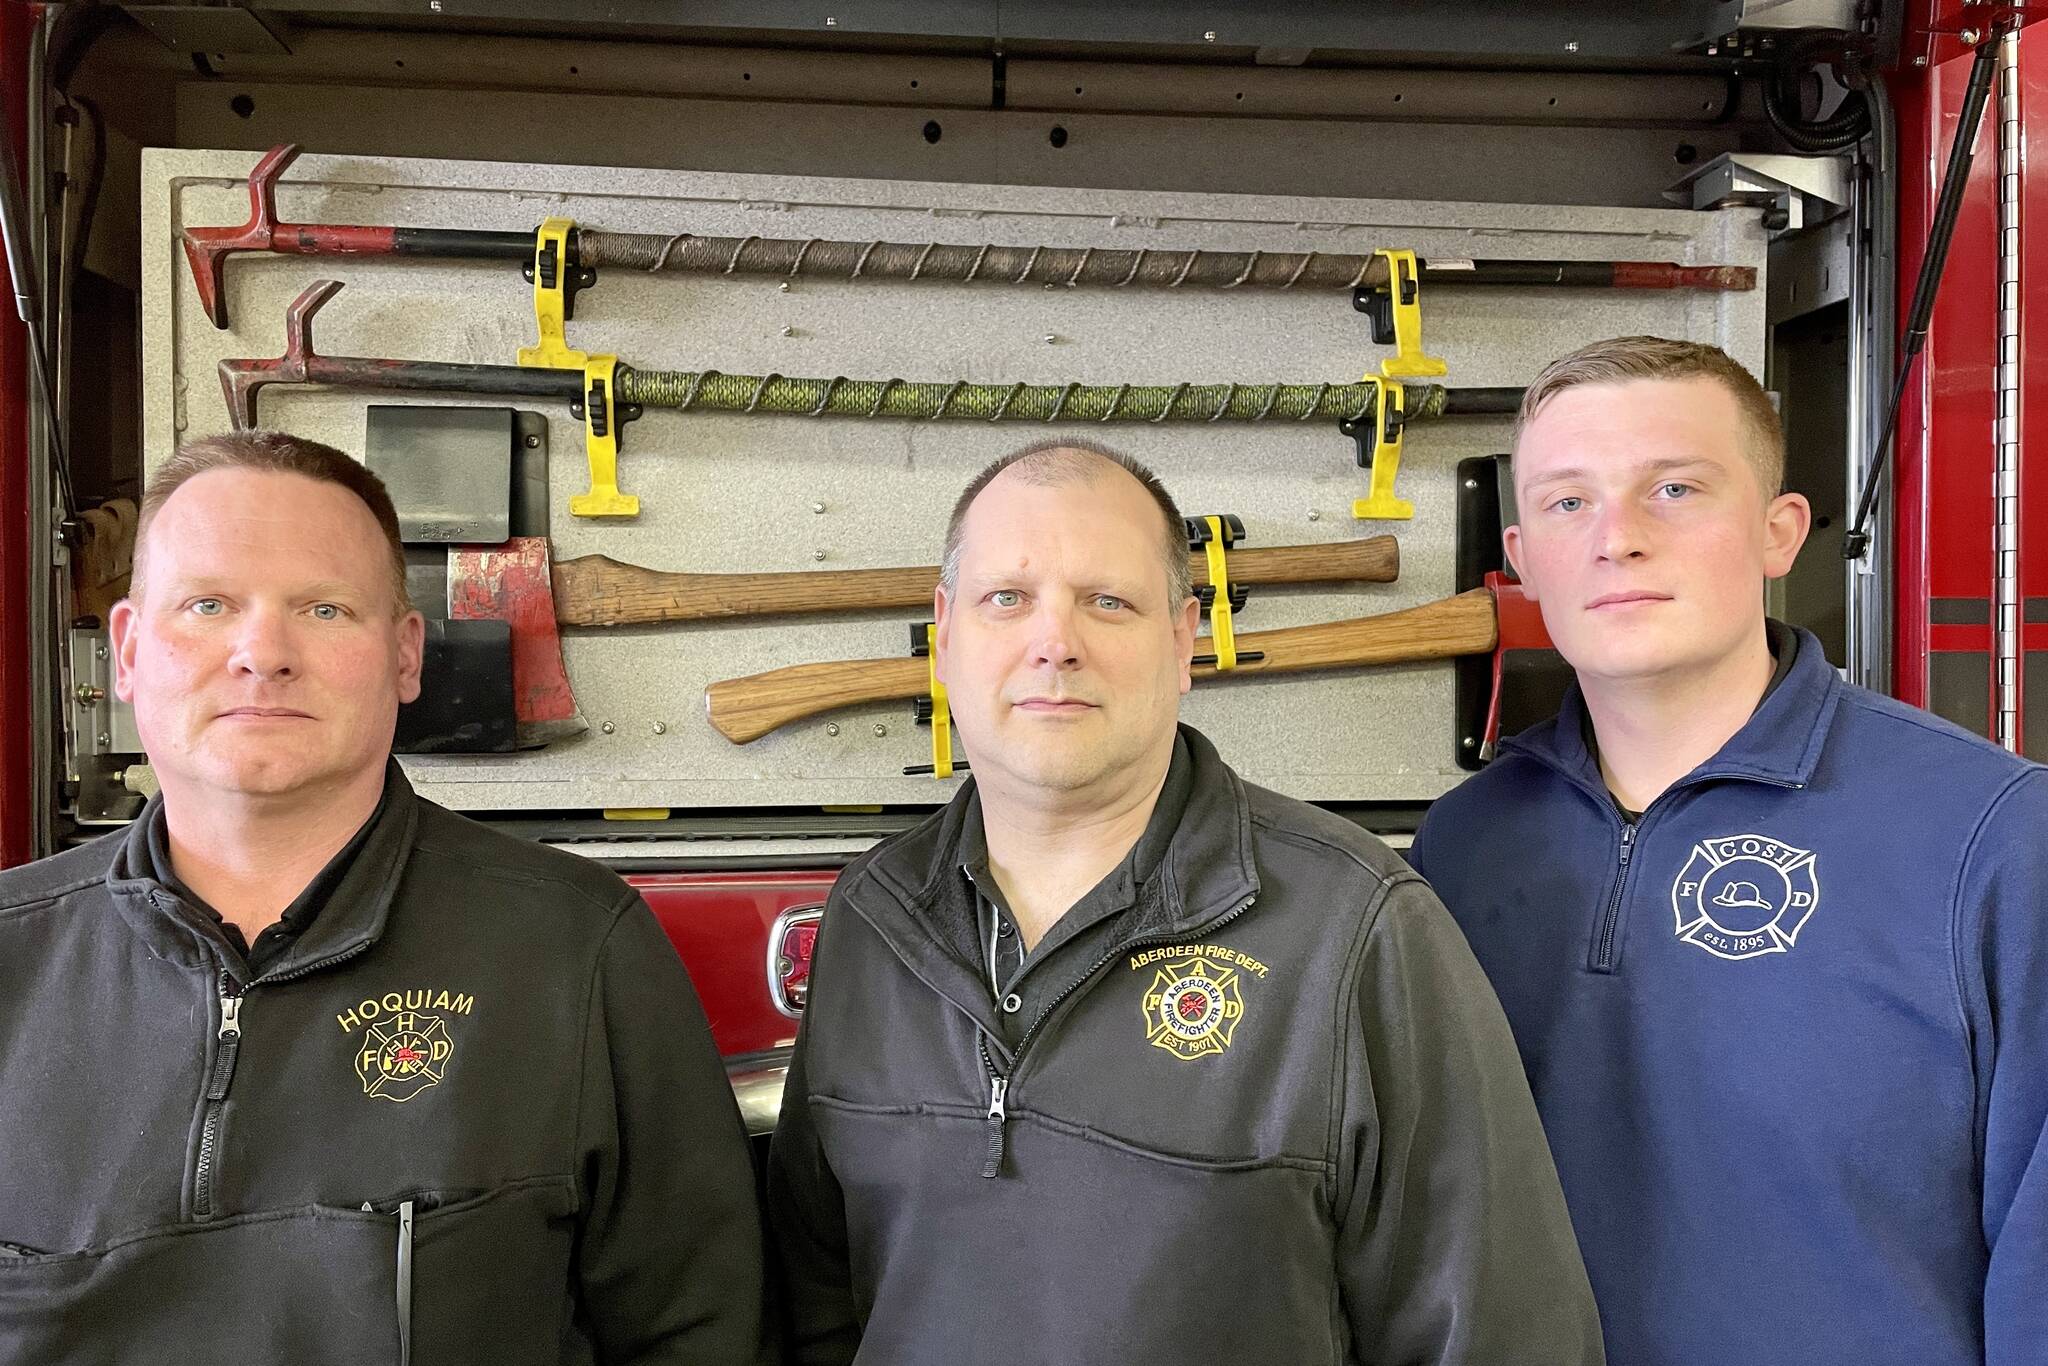 From left to right, Hoquiam Fire Chief Matt Miller, Aberdeen Fire Chief Dave Golding, and Cosmopolis Fire Chief Nick Falley are the chiefs of three departments involved in a failed vote to create a regional fire authority in Central Grays Harbor in April. (Michael S. Lockett / The Daily World)